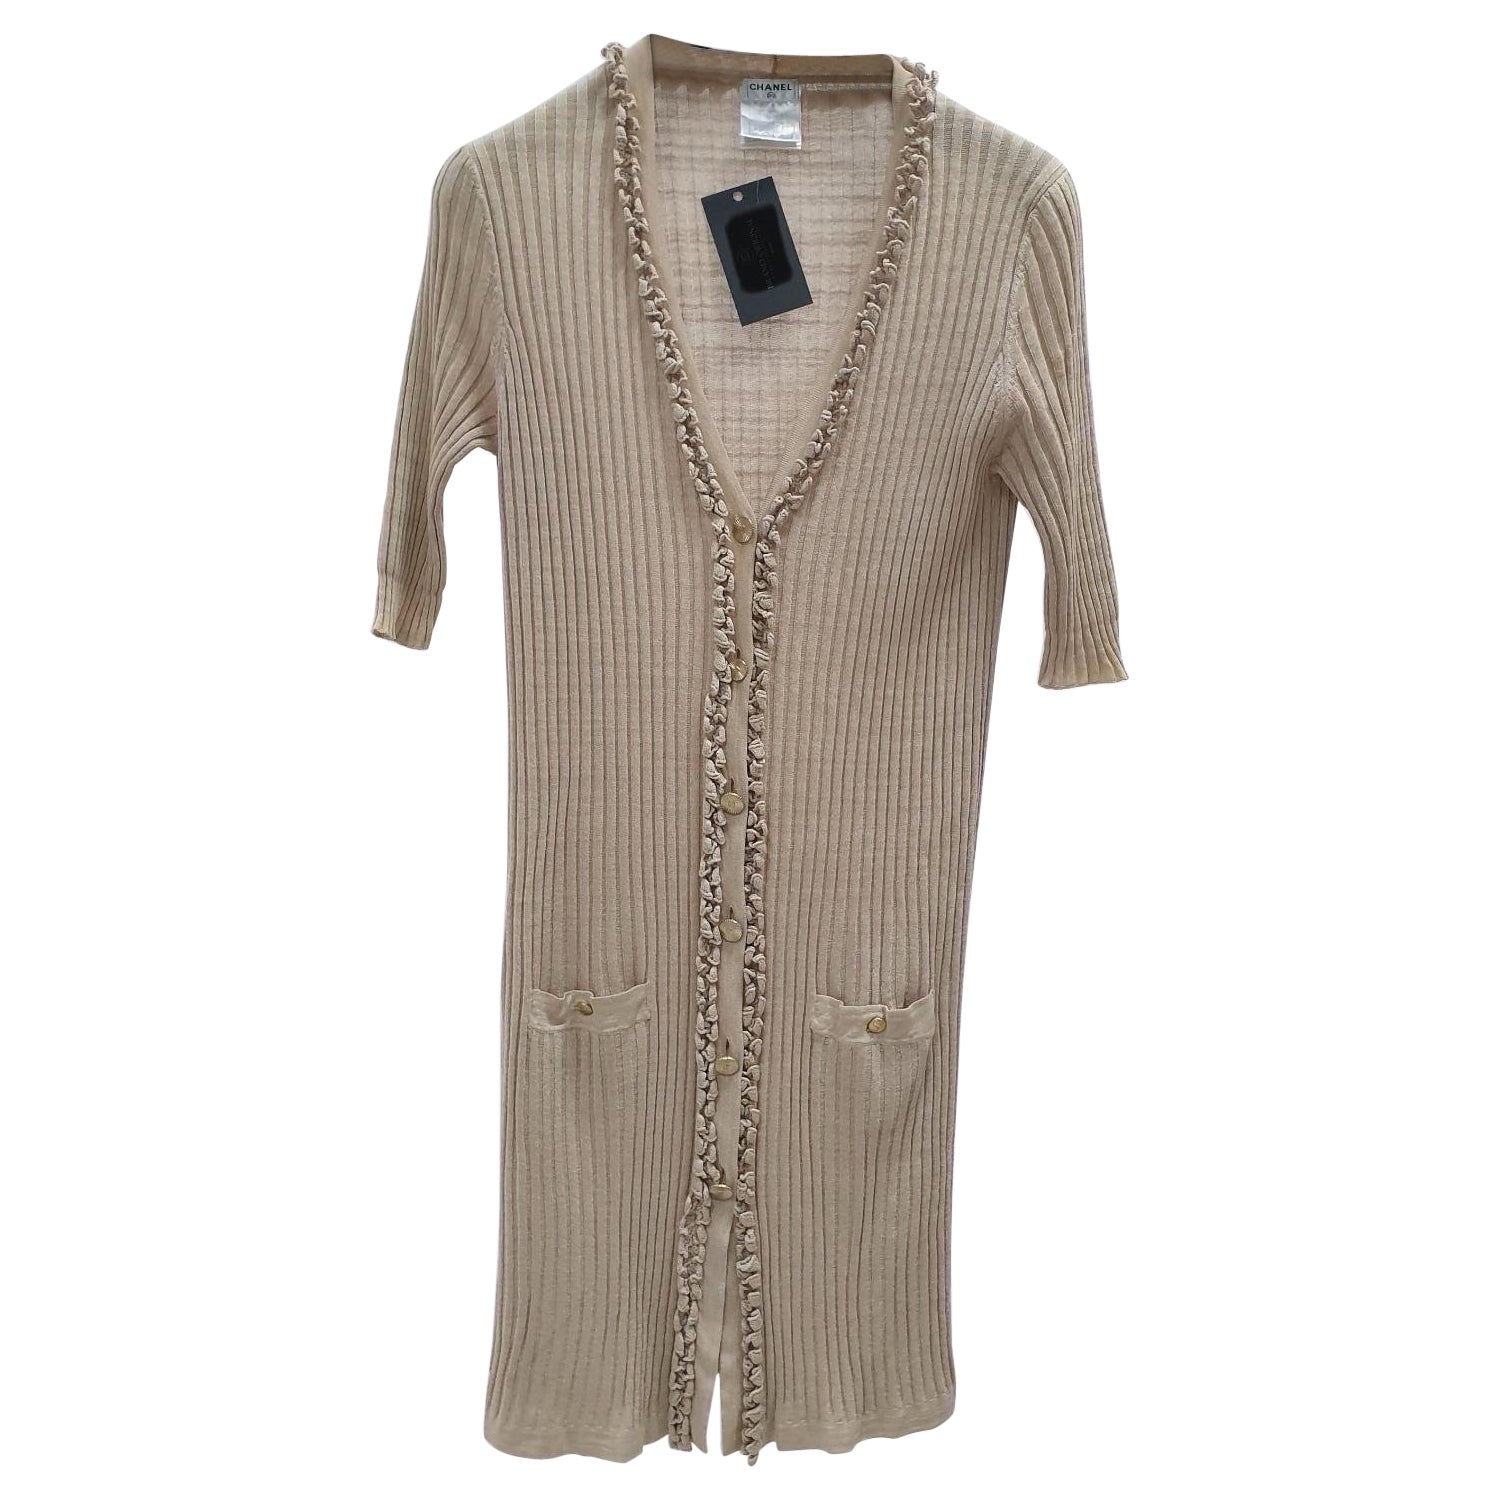 Chanel Spring 2009 Beige Cardigan Dress Tunic  For Sale